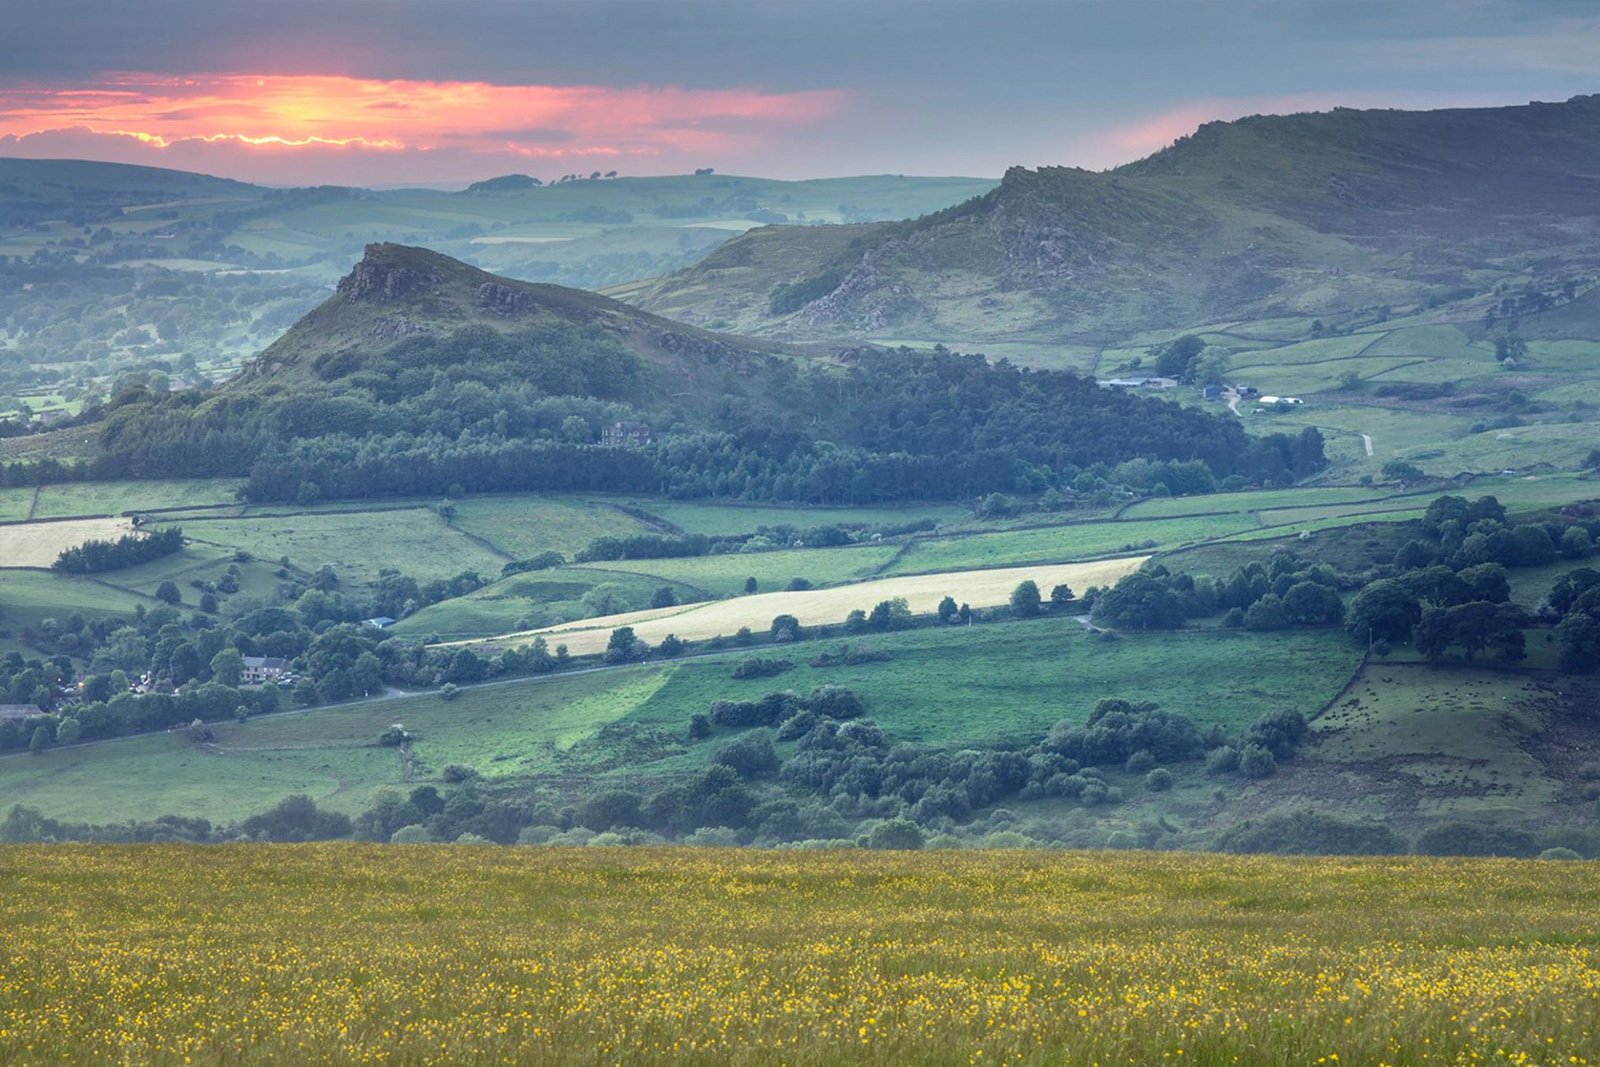 View of The Roaches by Phil Sproson courtesy of Peak District National Park